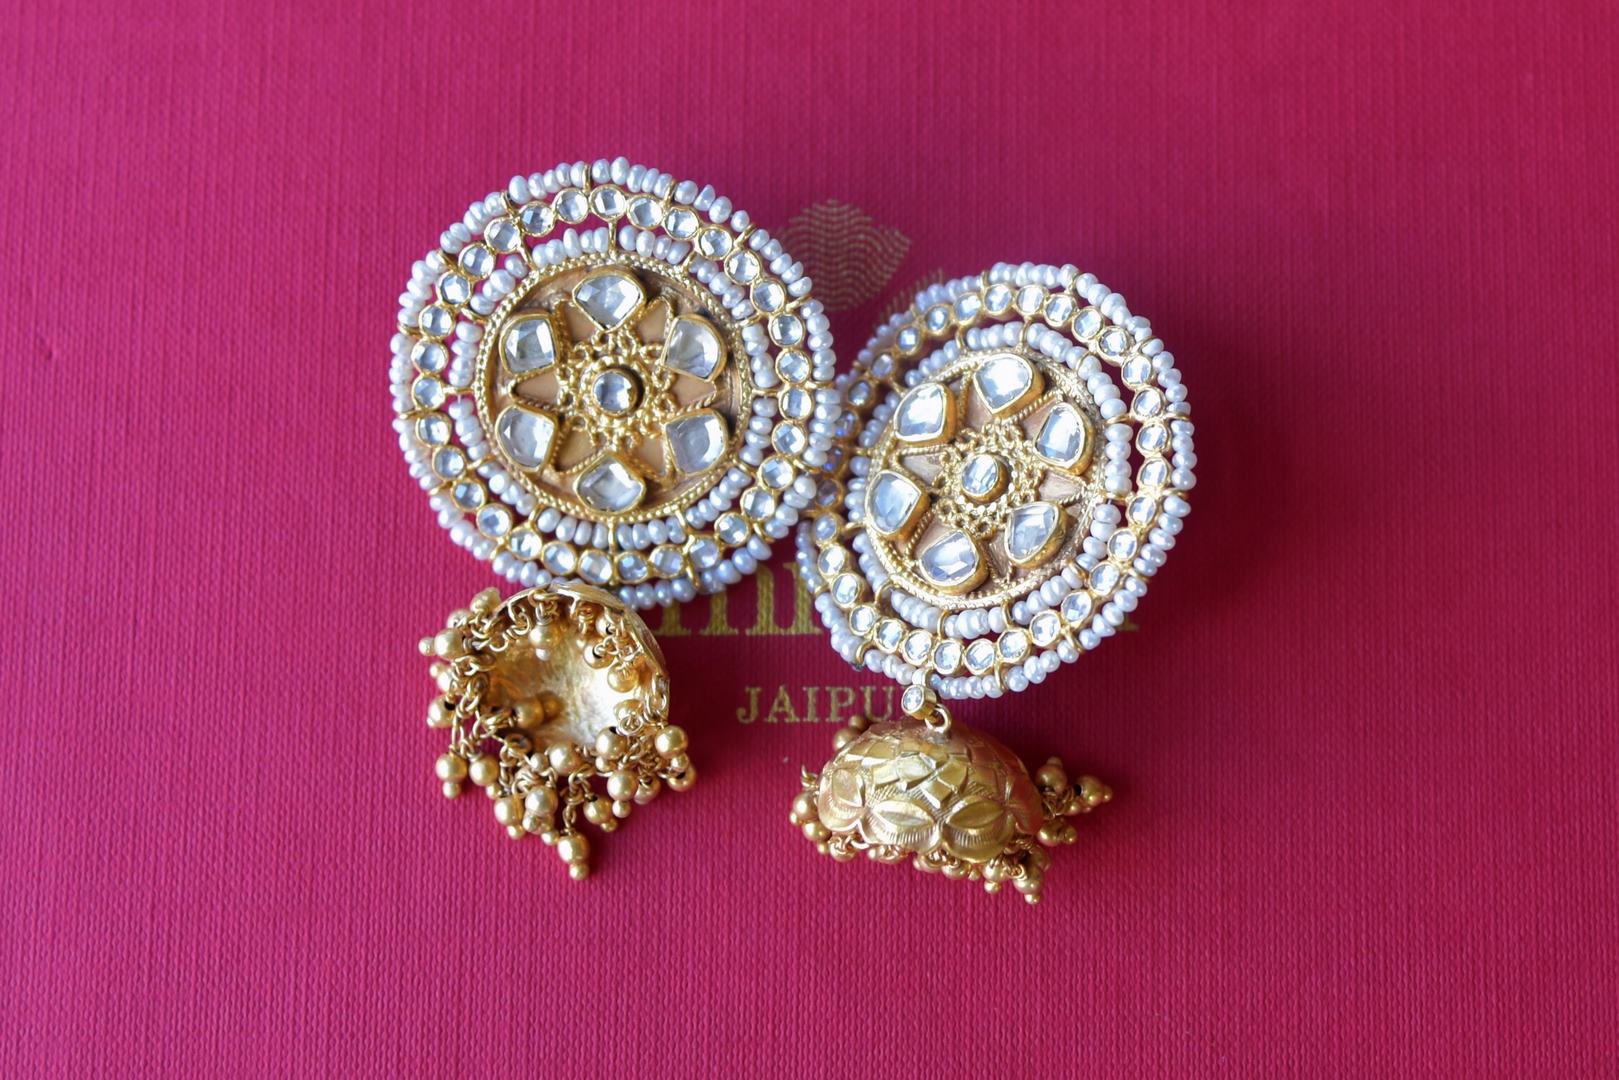 Buy Amrapali silver gold plated pearl and glass earrings online in USA with jhumka. Find an exquisite collection of handcrafted silver gold plated jewelry in USA at Pure Elegance Indian fashion store. Complete your festive look with traditional Indian jewellery, silver gold plated earrings, silver jewellery from our online store.-flatlay